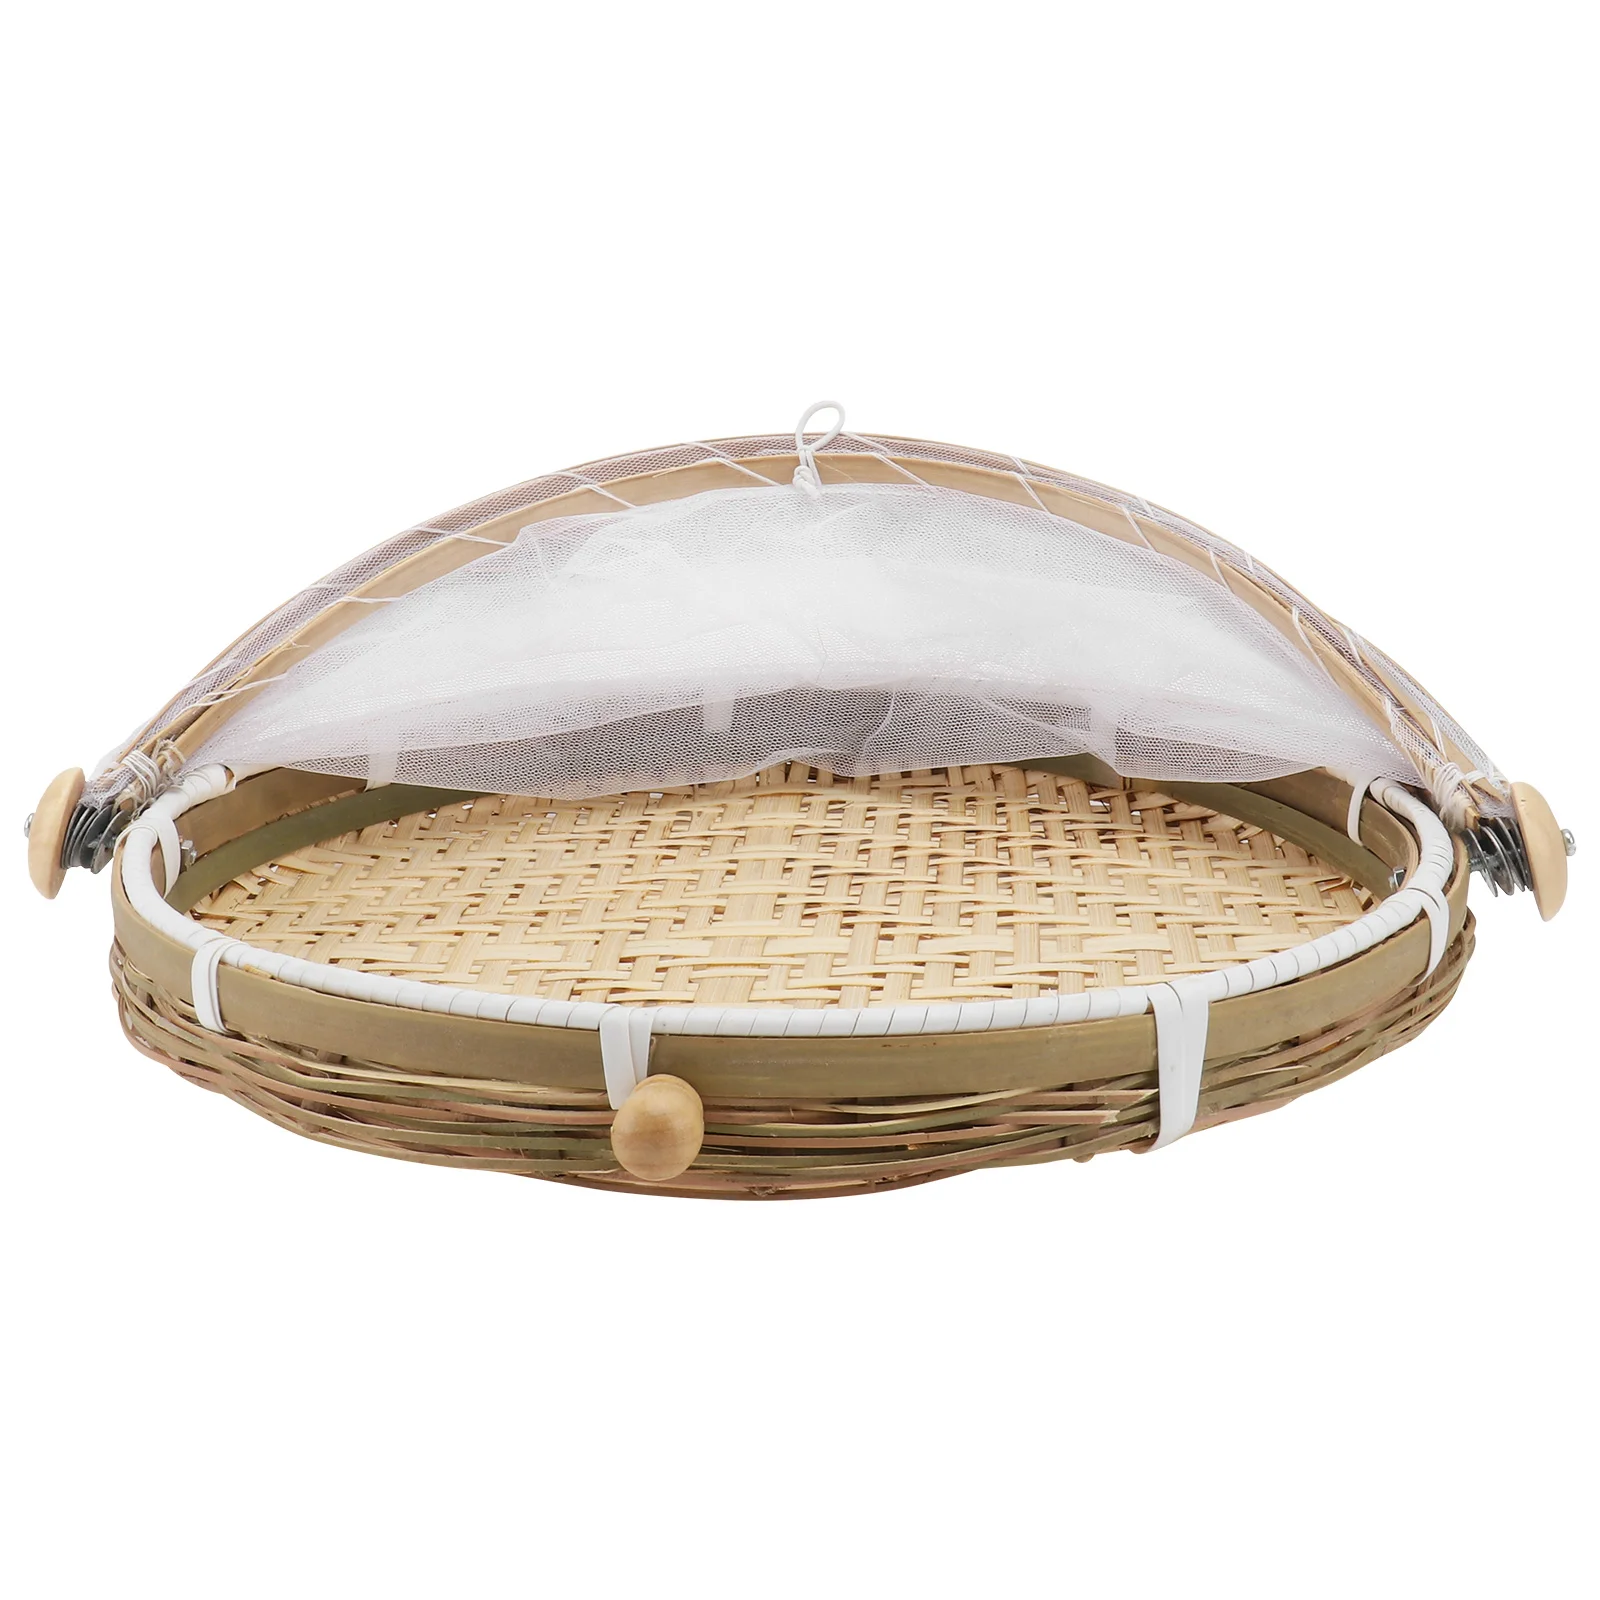 

Basket Bamboo Serving Woven Tent Cover Tray Bread Wicker Baskets Storage Fruit Rattan Picnic Screen Flat Covered Mesh Round Hand